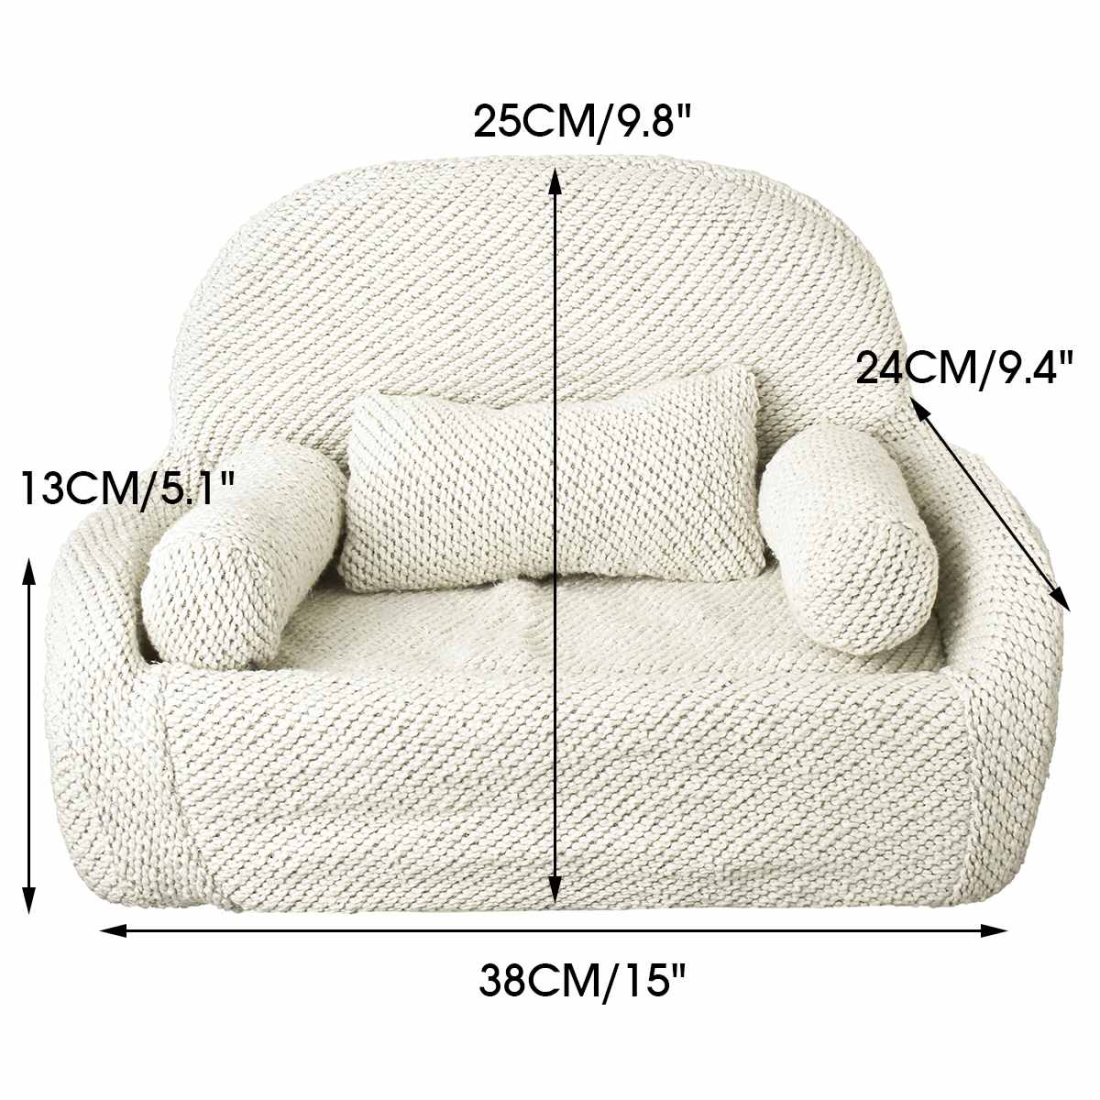 Newborn Baby Photography Props Set 3 Mini Sofa Arm Chairs And Birth Pillow  For Poser Po Accessories LJ2012081905 From Lpqro, $30.6 | DHgate.Com